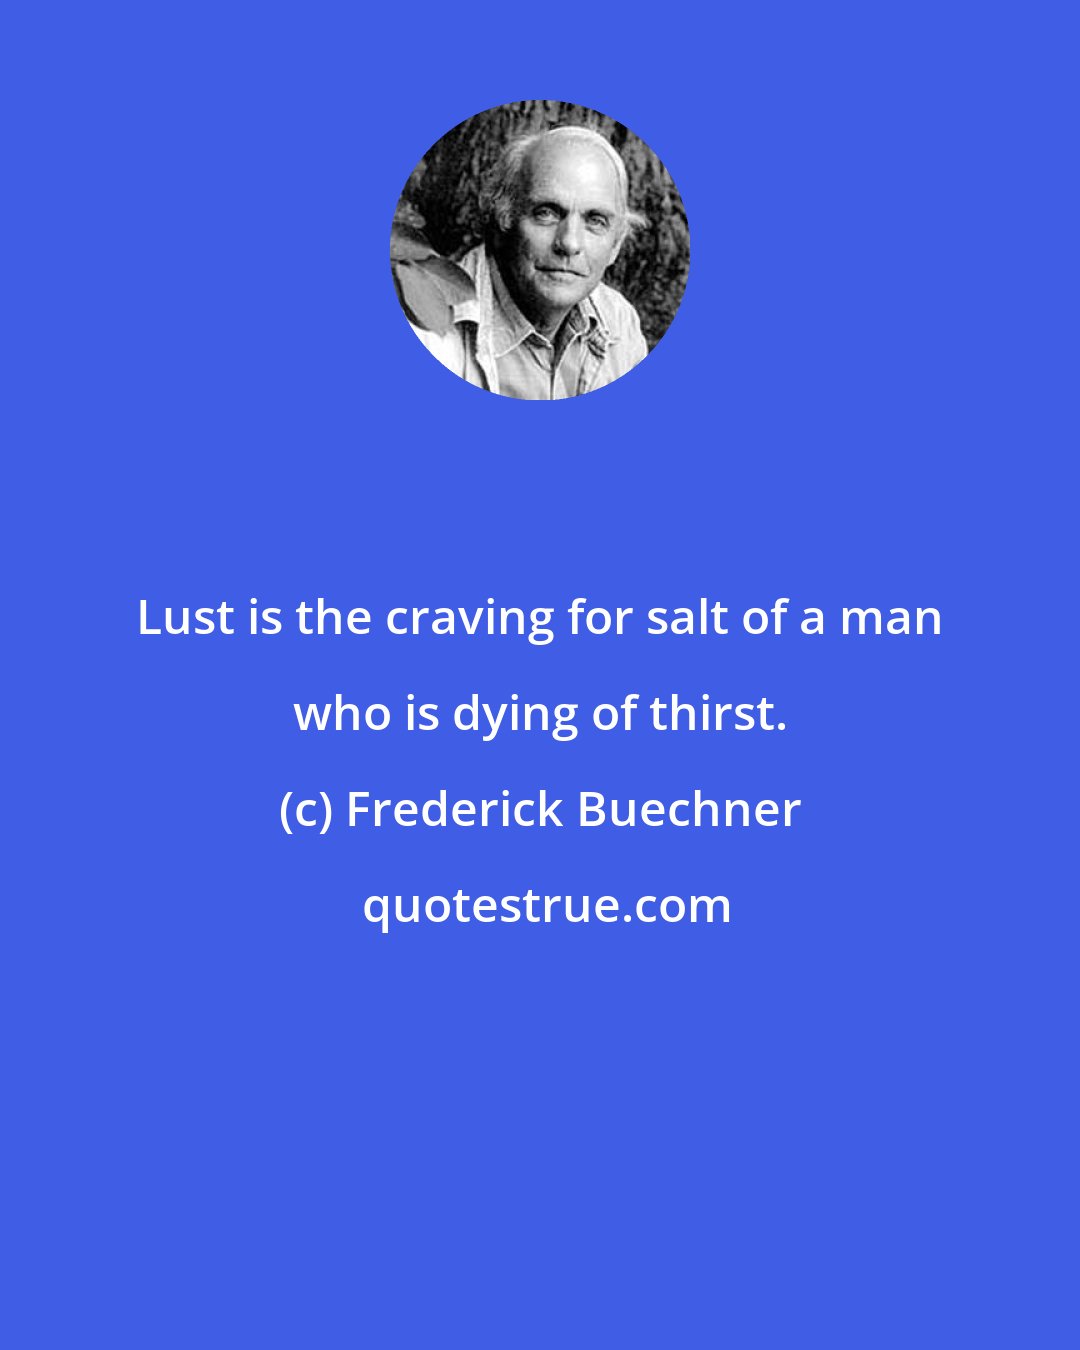 Frederick Buechner: Lust is the craving for salt of a man who is dying of thirst.